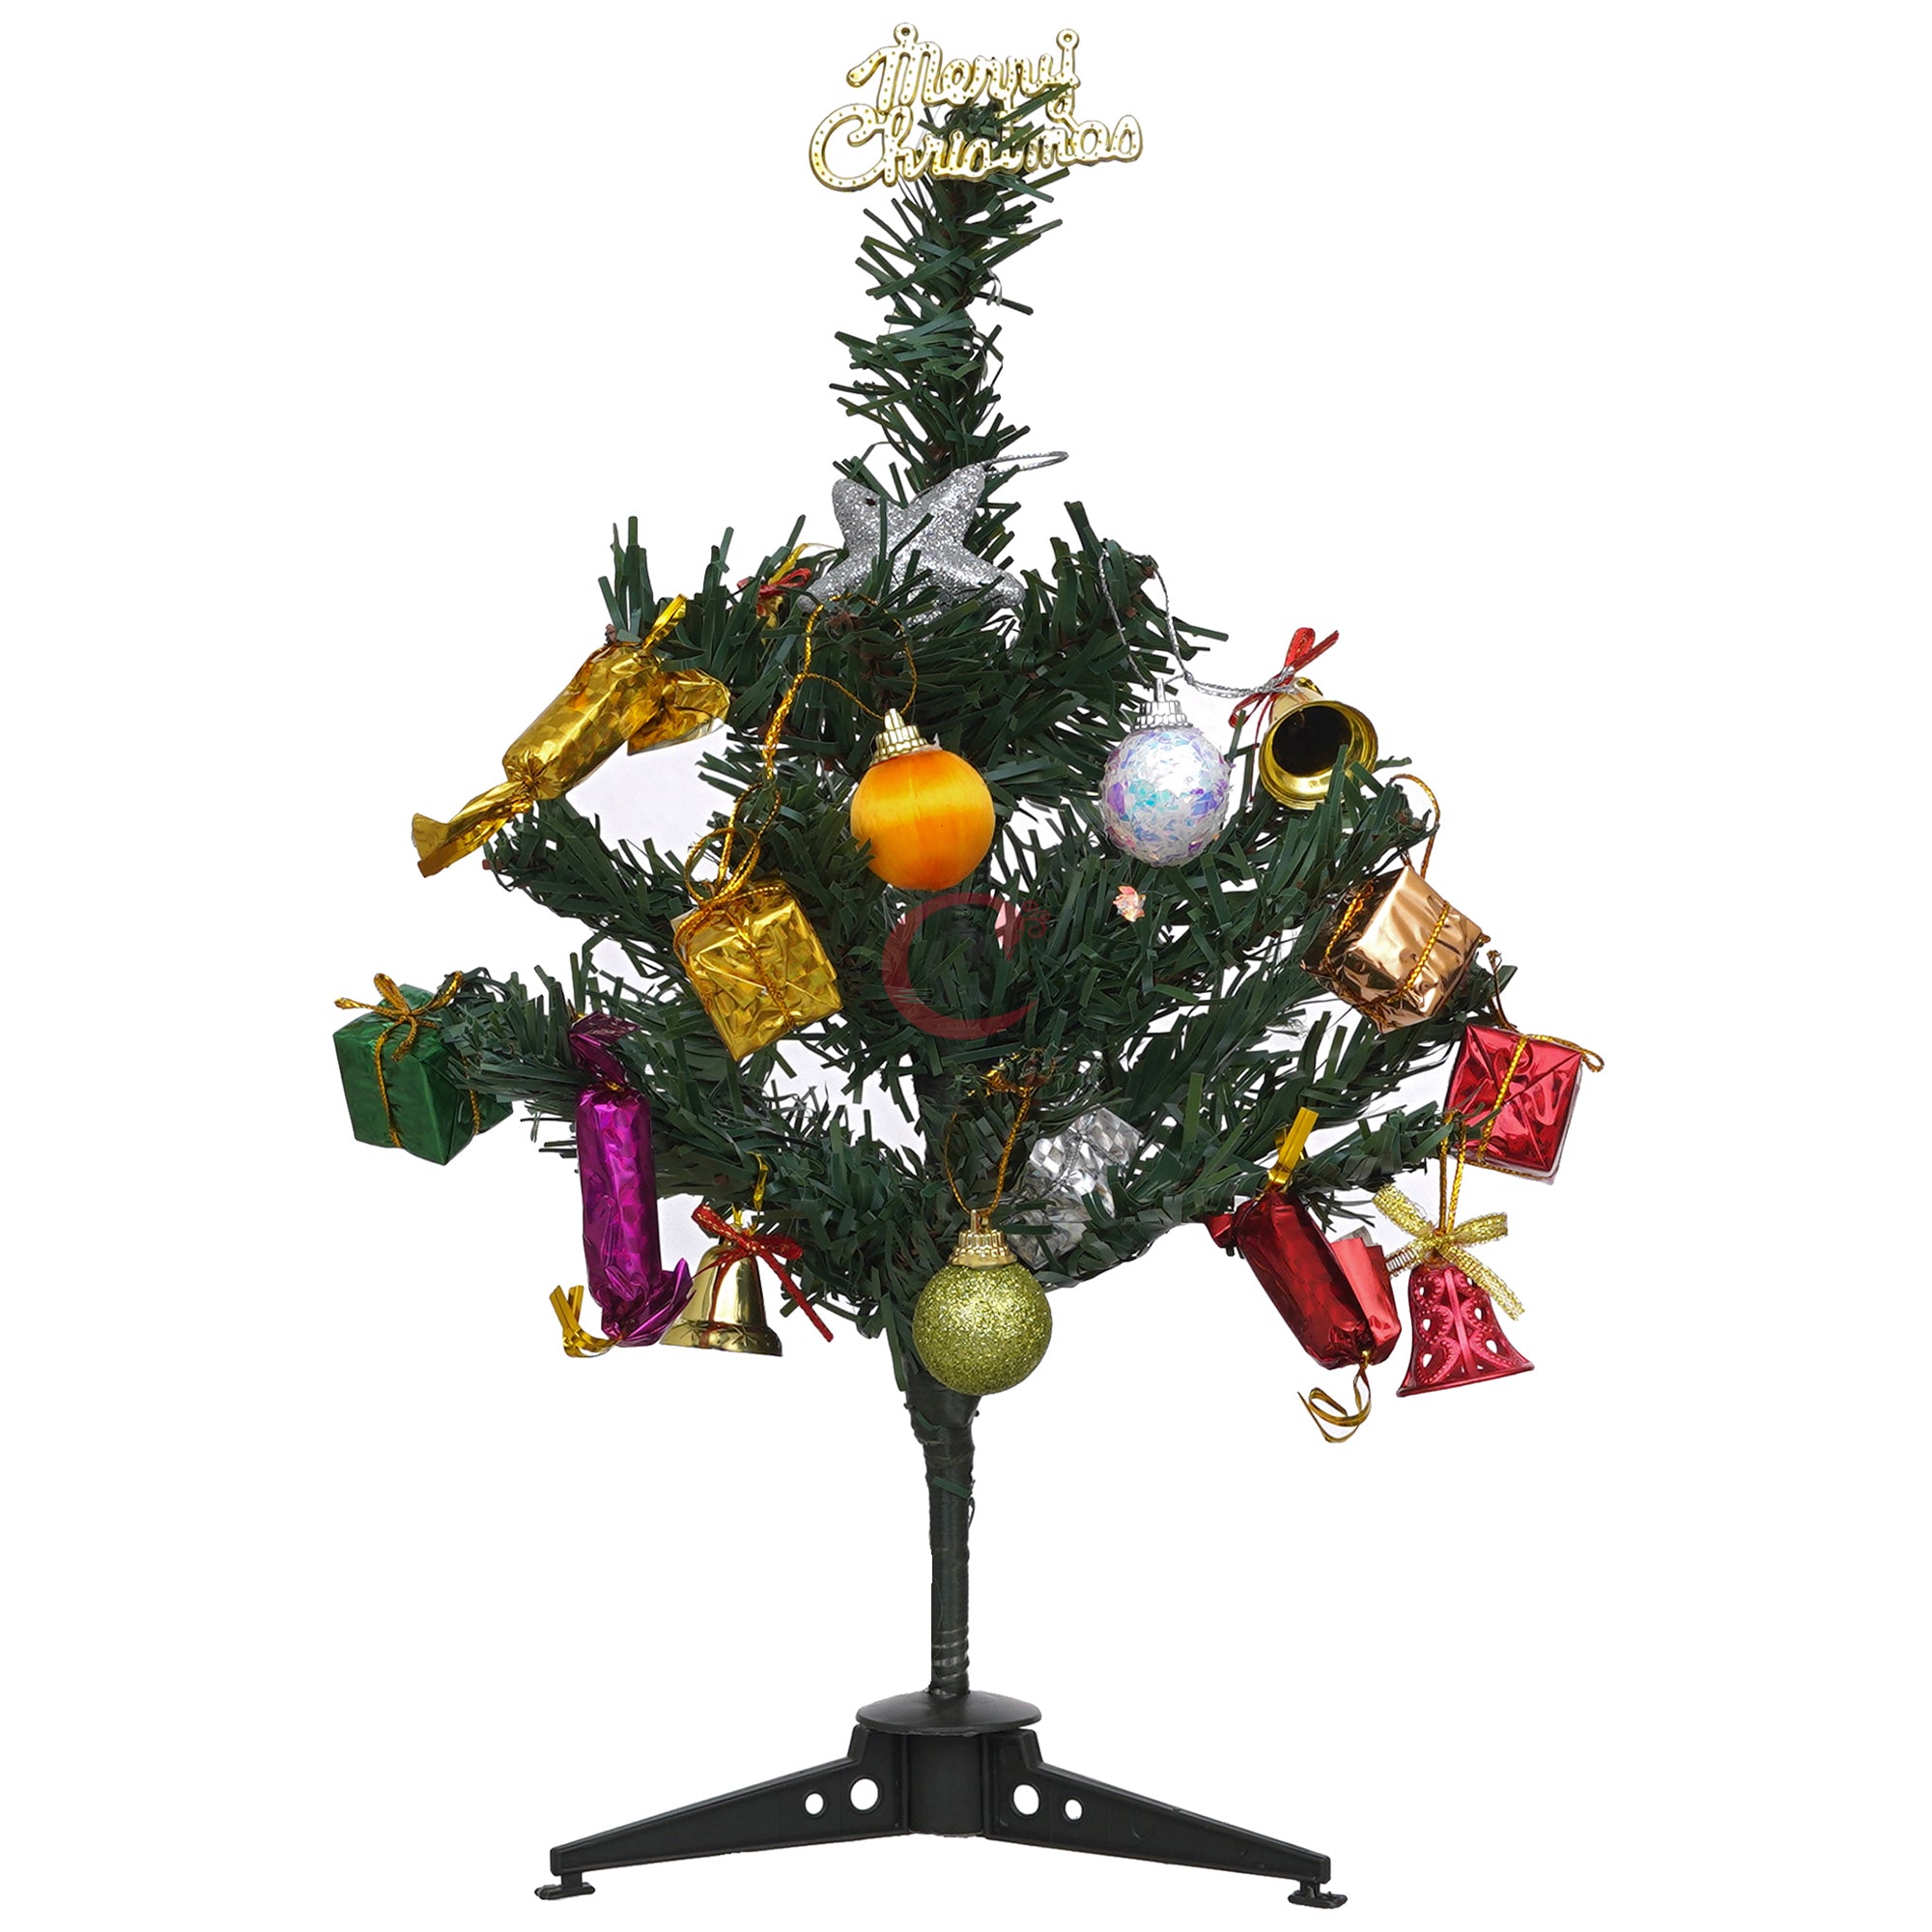 eCraftIndia 1 Feet Green Artificial Christmas Tree Xmas Pine Tree with Stand and 40 Christmas Decoration Ornaments Props - Merry Christmas Decoration Item for Home, Office, and Church 6